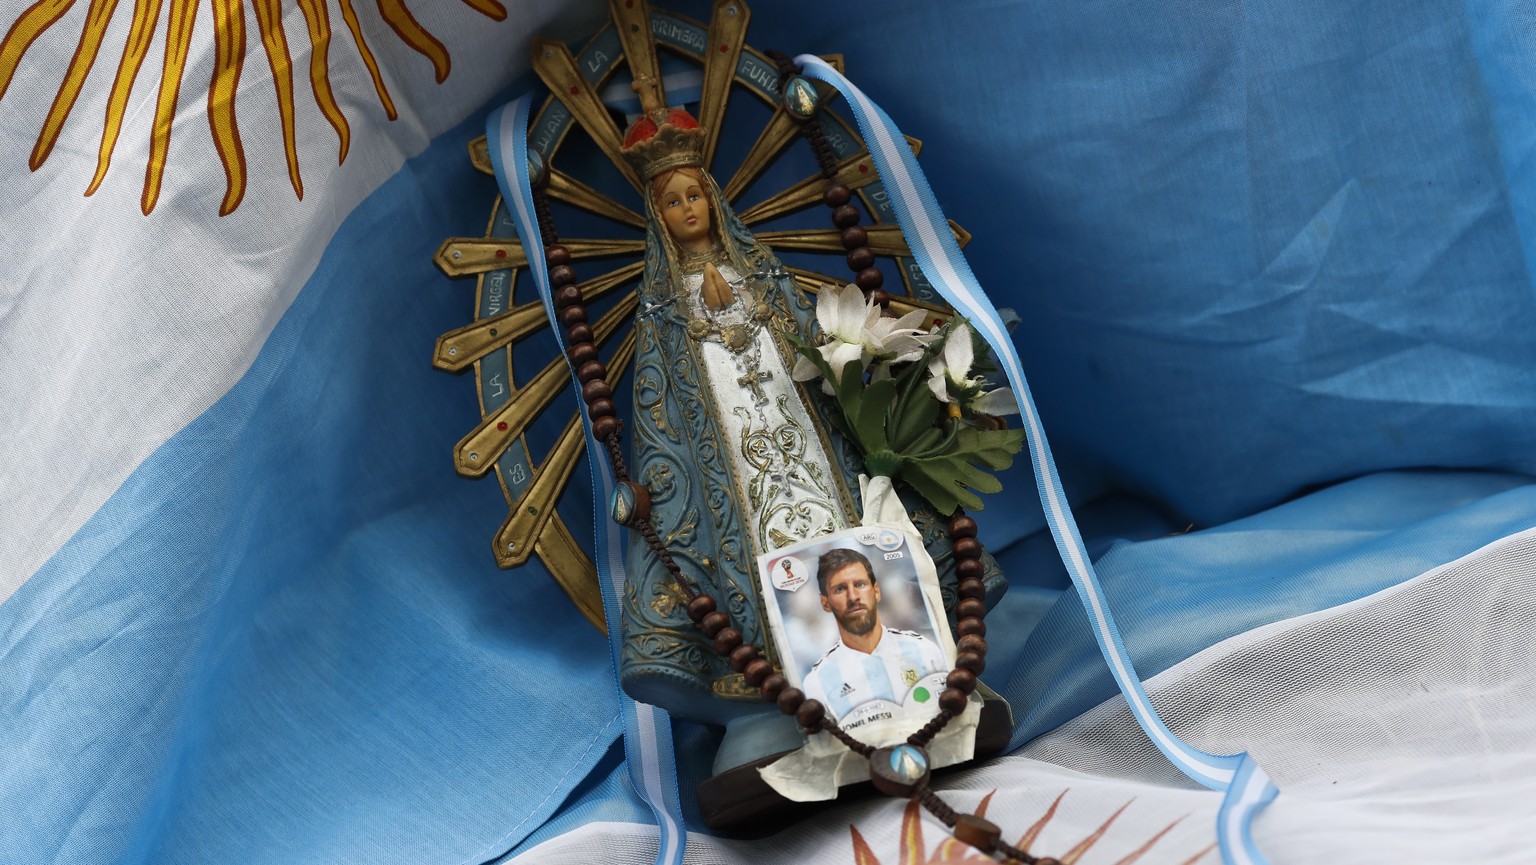 epa06842885 A photograph of the player Lionel Messi is placed next to the figure of a virgin on an Argentinian flag during as Argentinian fans watch the match between Argentina and Nigeria at the 2018 ...